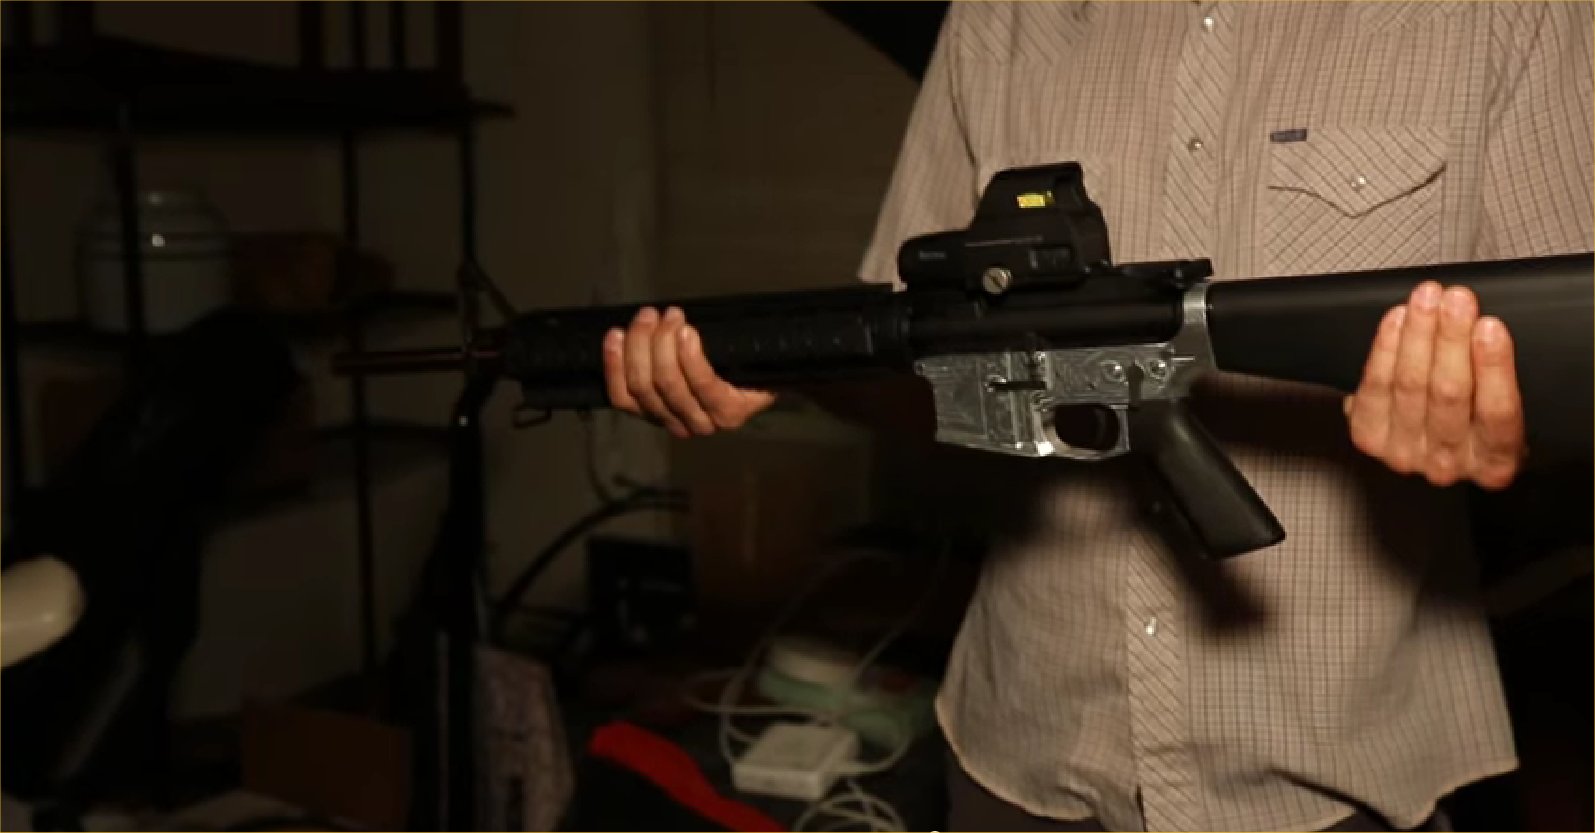 The Ghost Gunner Can Manufacture AR-15s in a Matter of Hours from Your Home